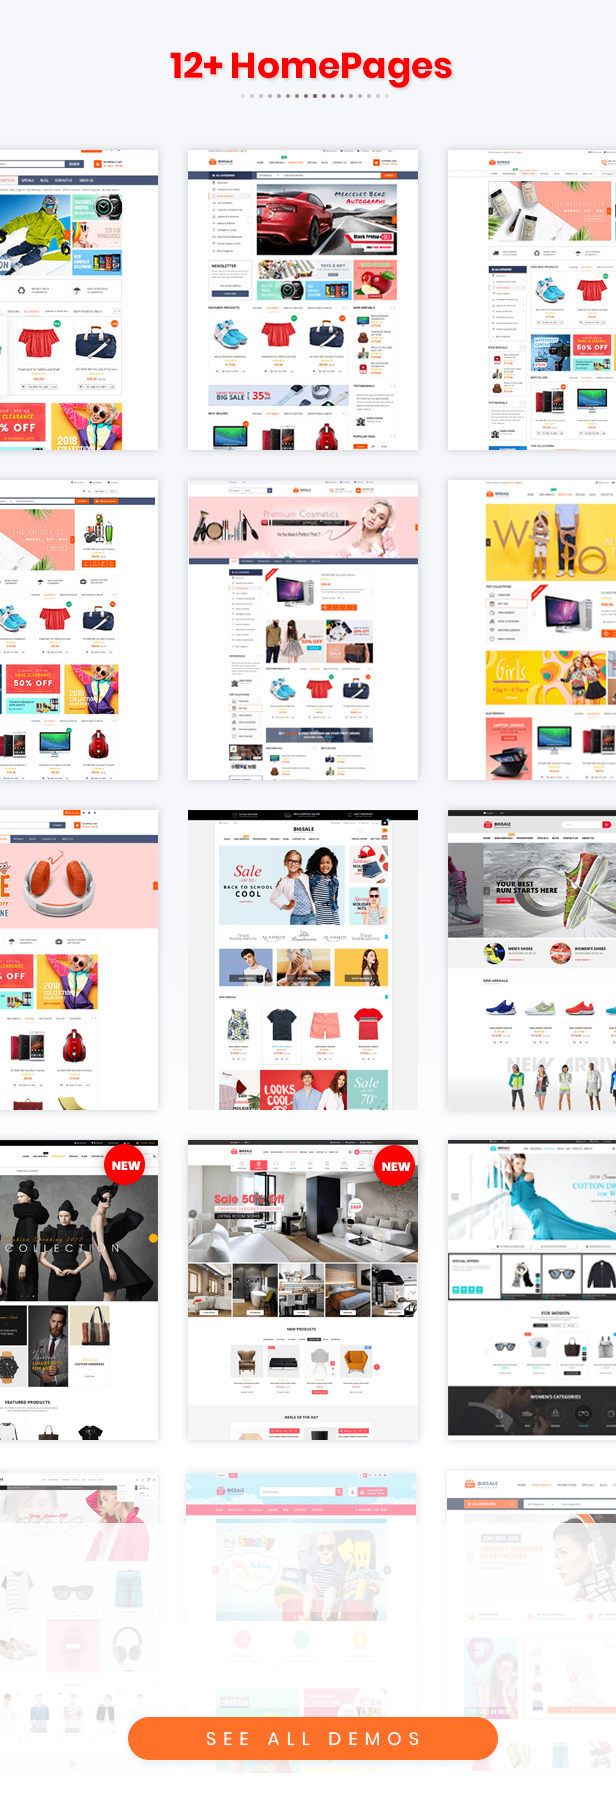 BigSale - The Clean, Minimal & Unlimited Bootstrap 4 Shopify Theme